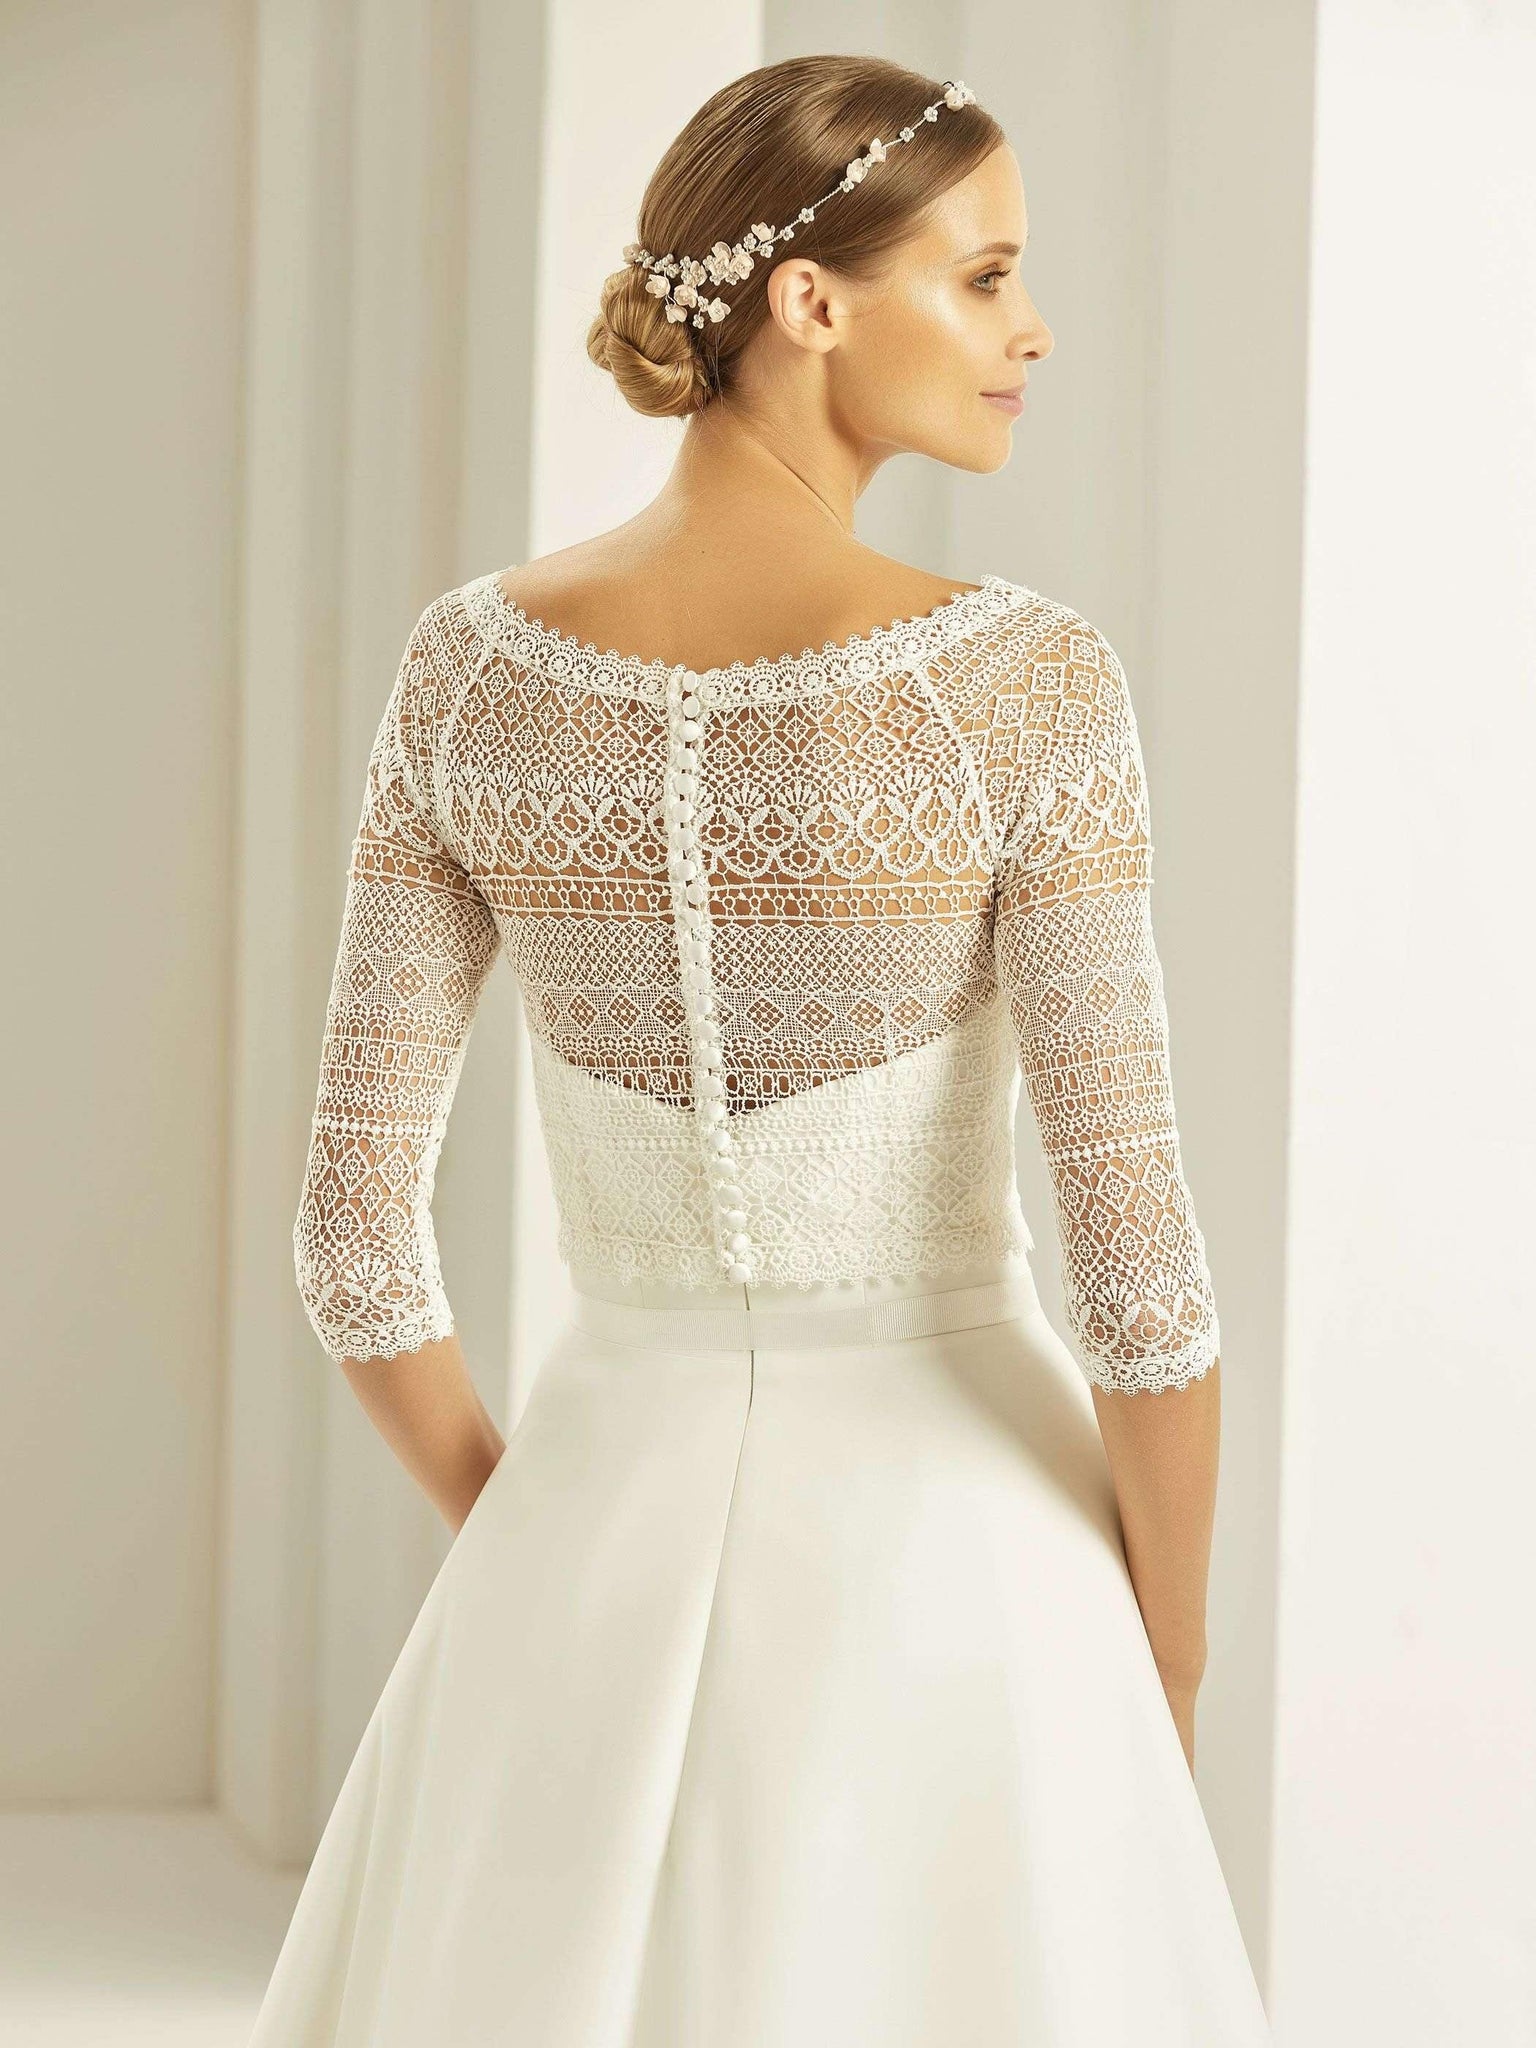 Elle Lace Jacket - Adore Bridal and Occasion Wear